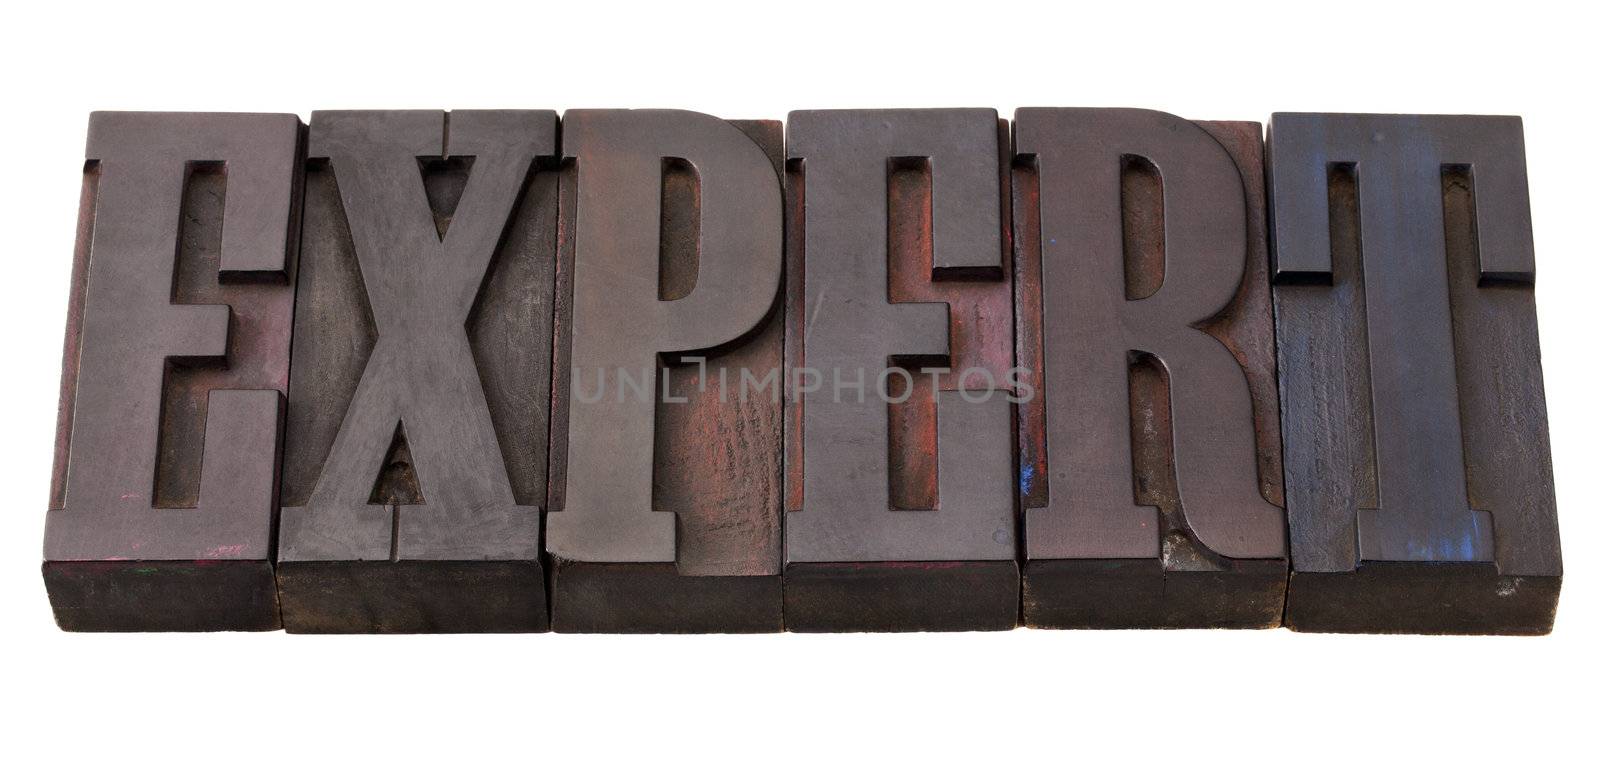 expert word in antique wooden letterpress printing blocks, stained by color inks, isolated on white